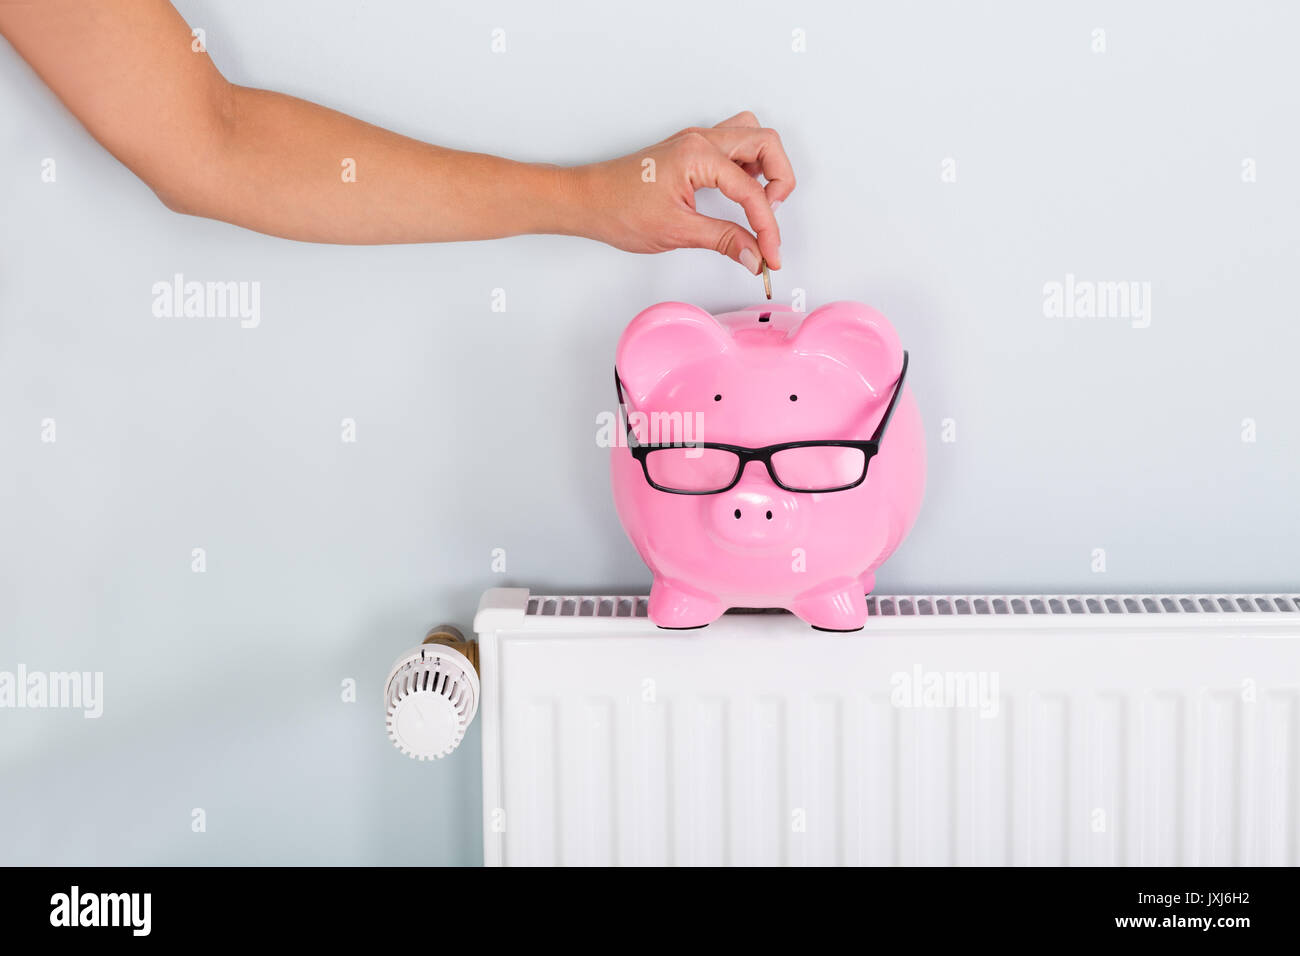 Woman Hand Inserting Coin In Piggy Bank On Radiator To Save On Energy Bill Stock Photo